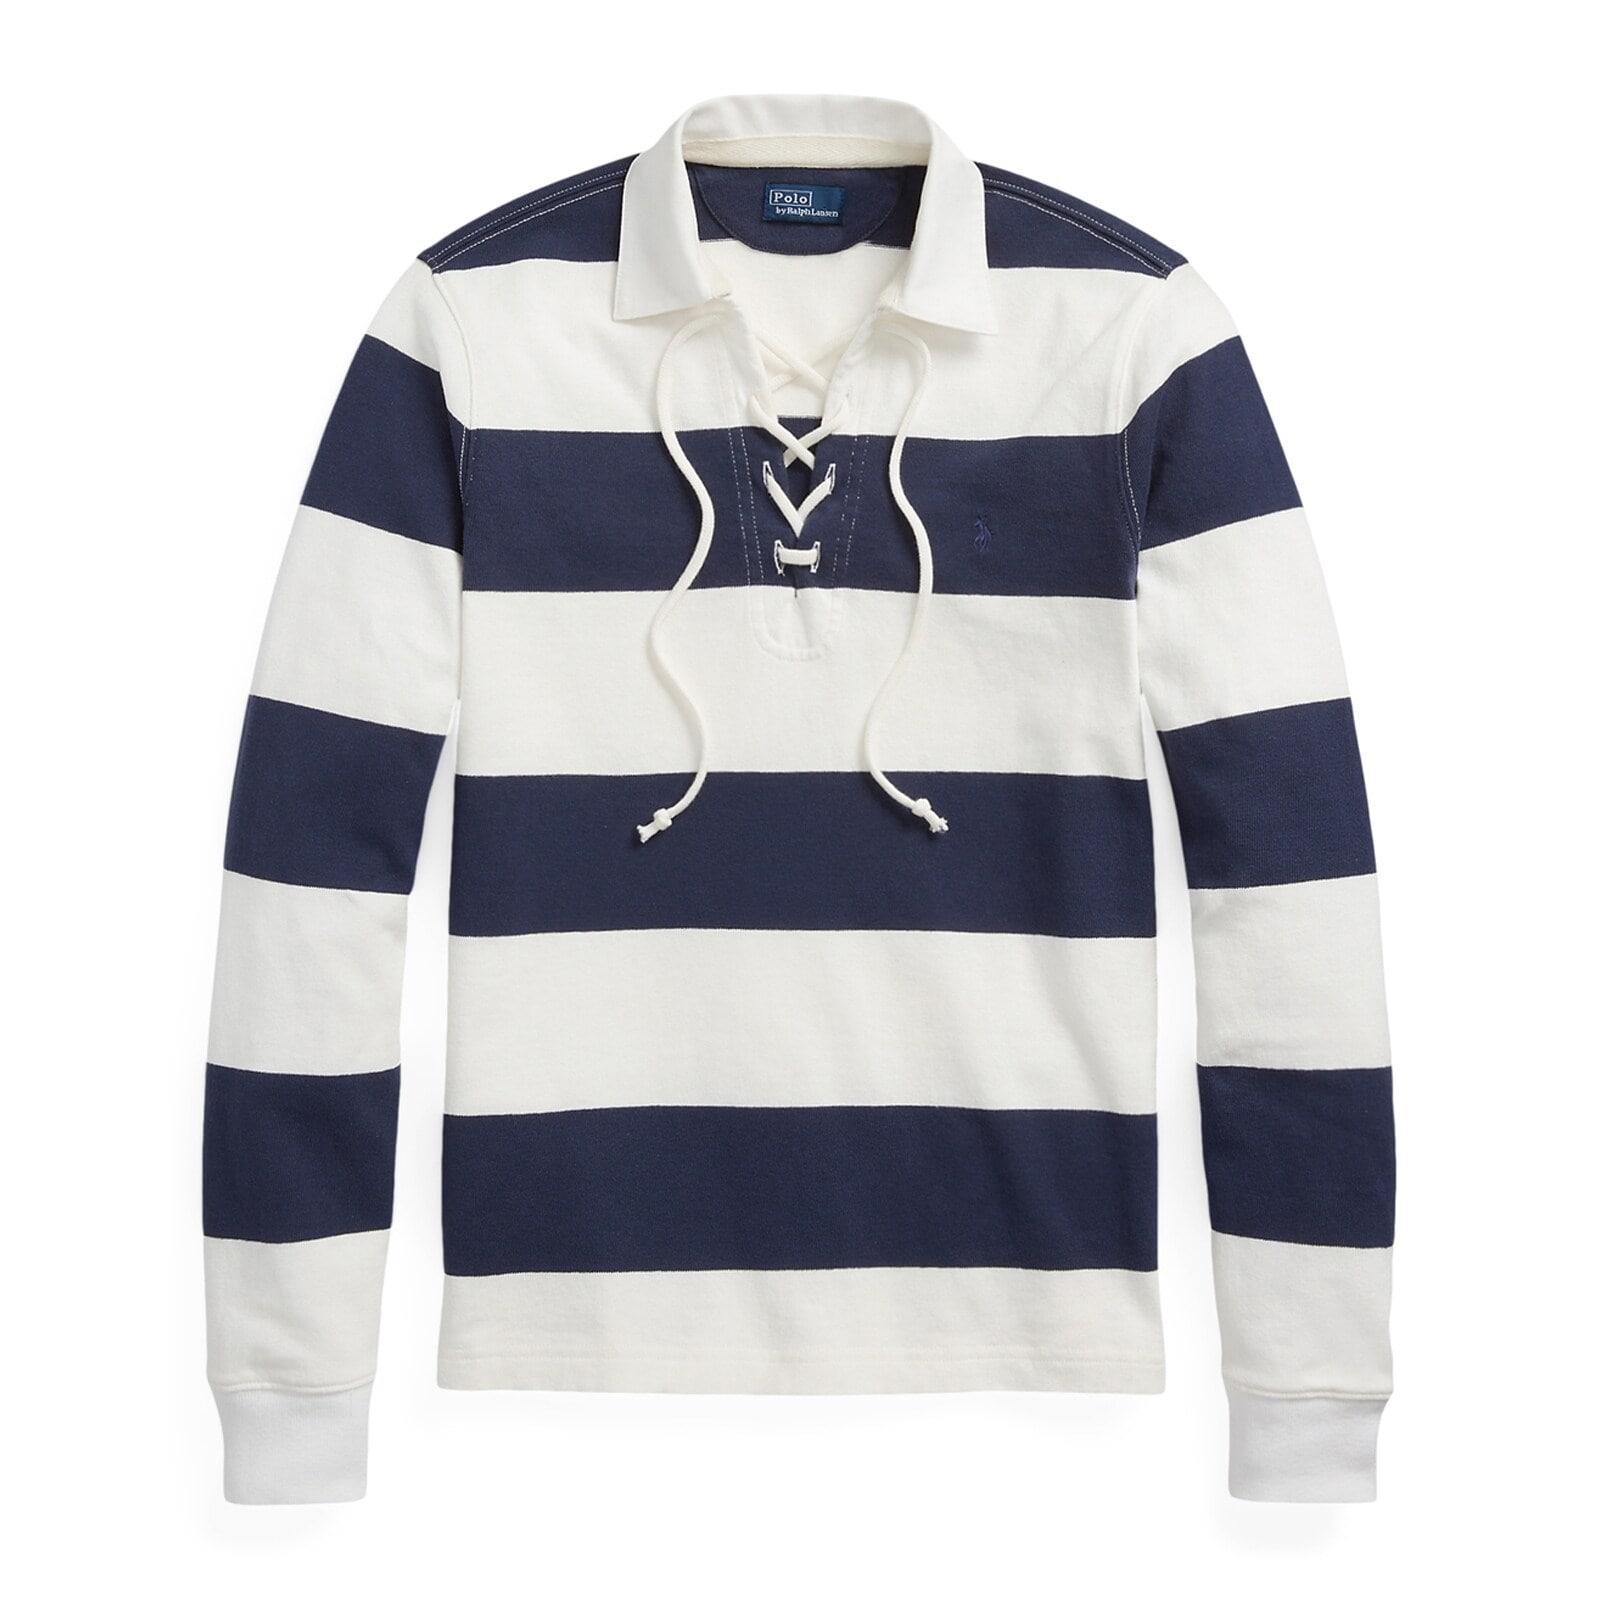 women navy striped lace-up jersey rugby shirt